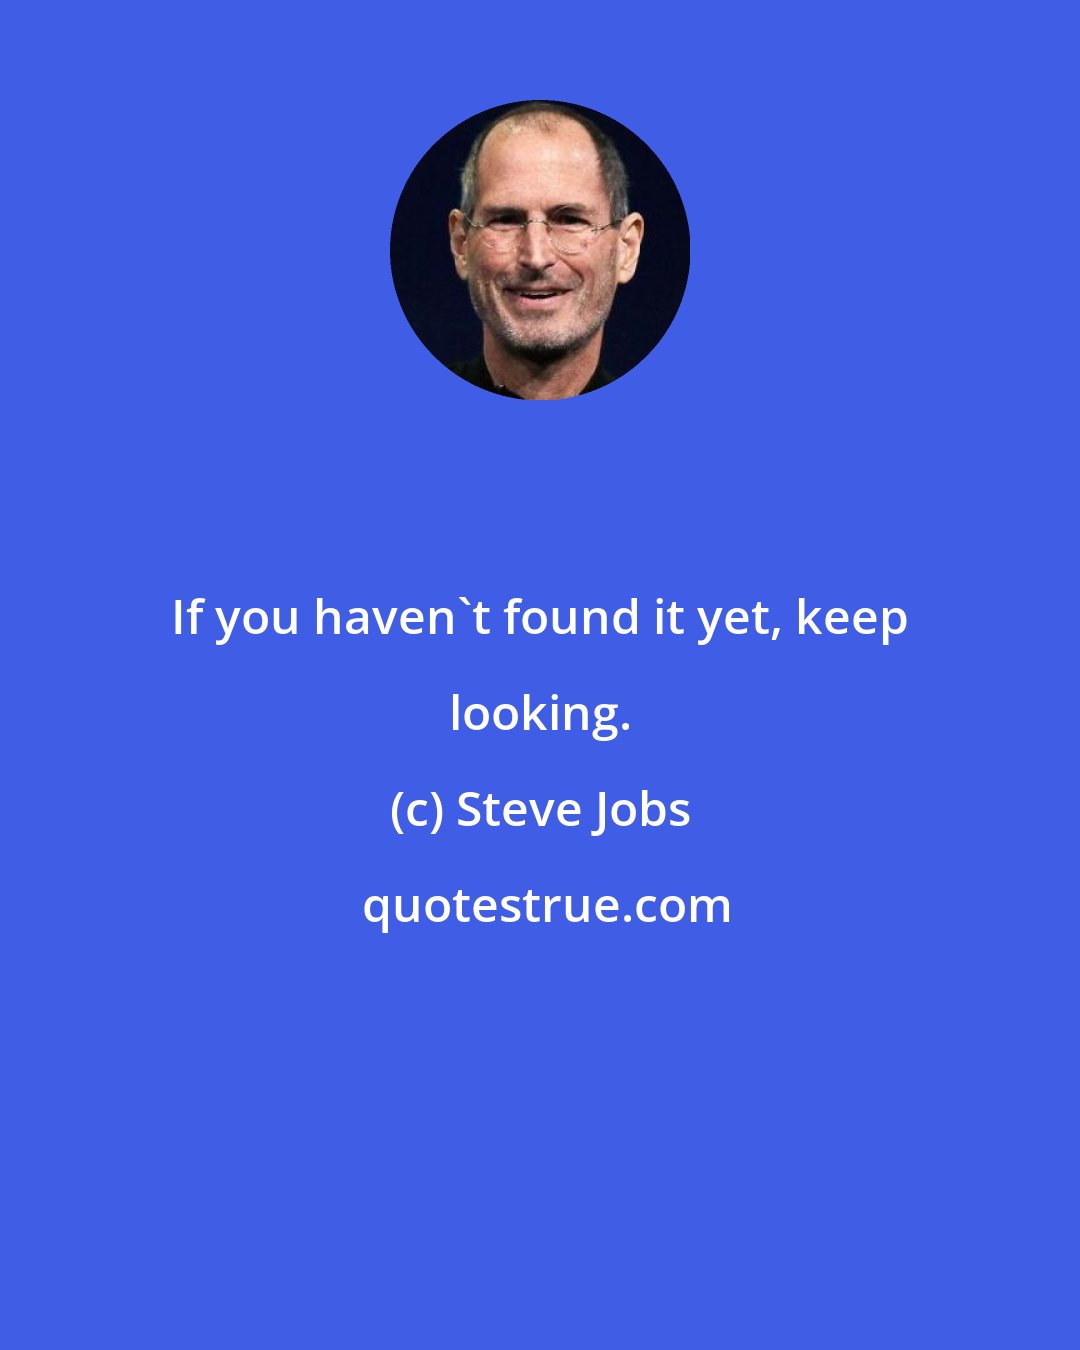 Steve Jobs: If you haven't found it yet, keep looking.